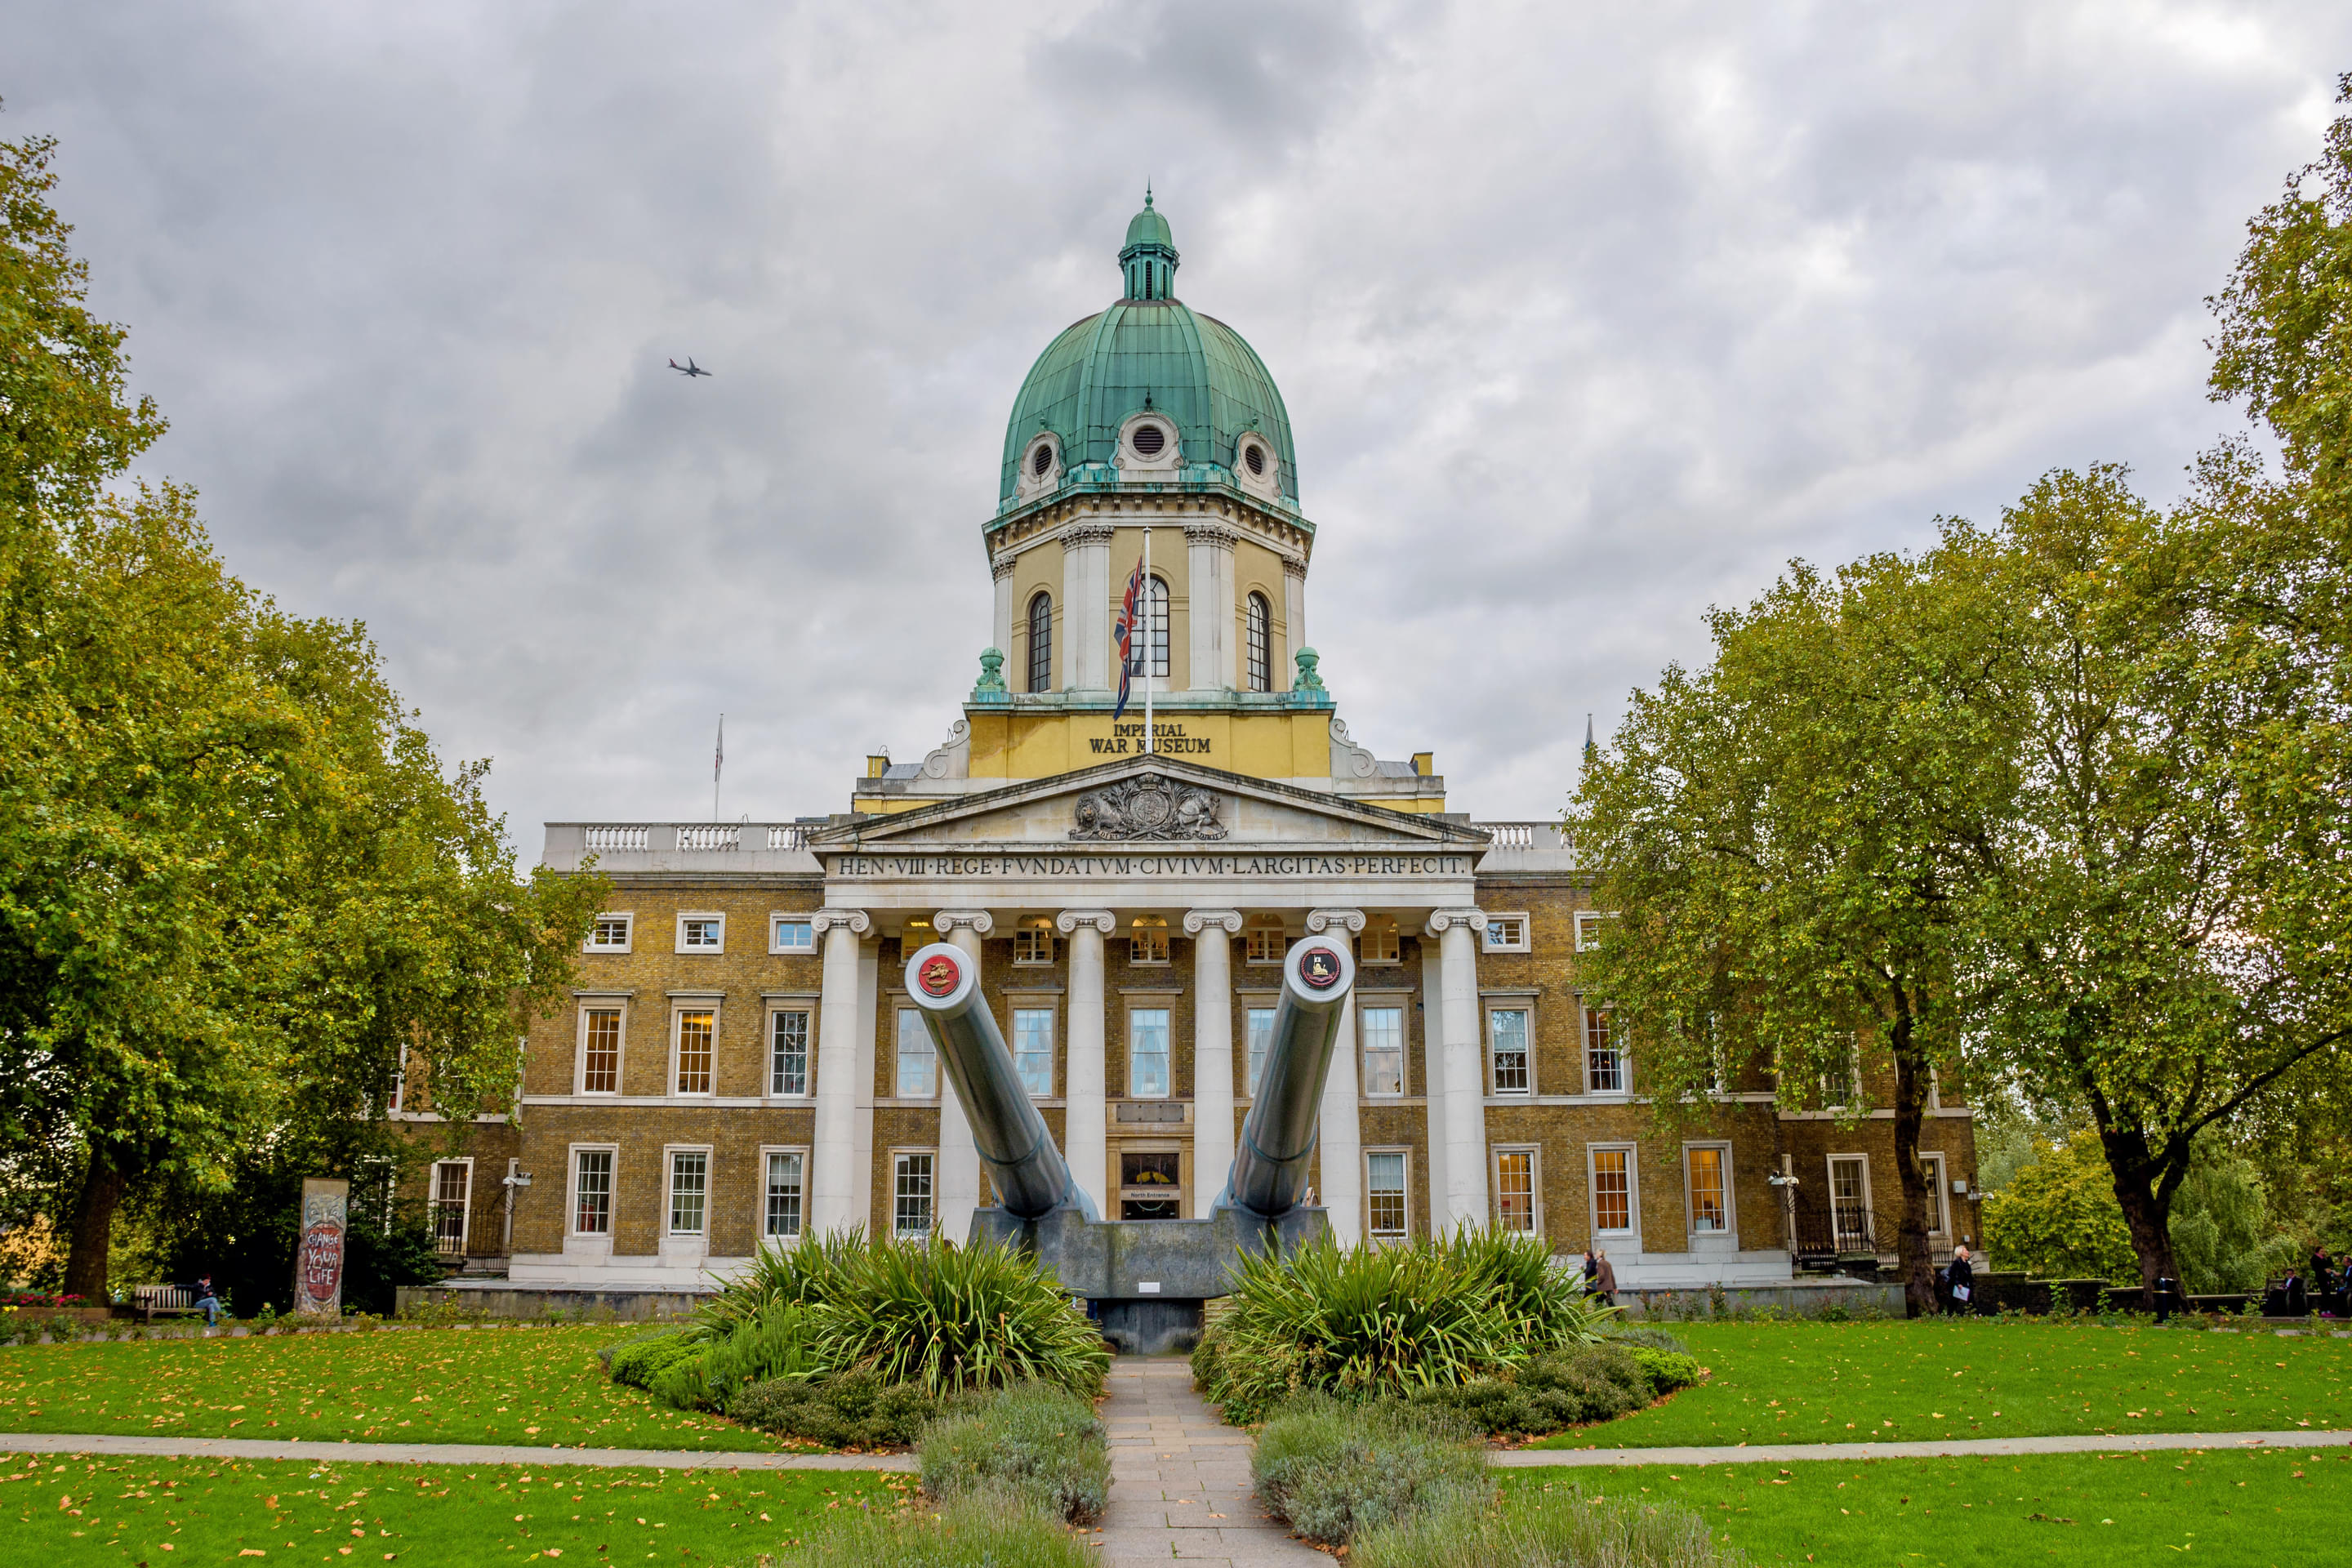 The Imperial War Museum Overview